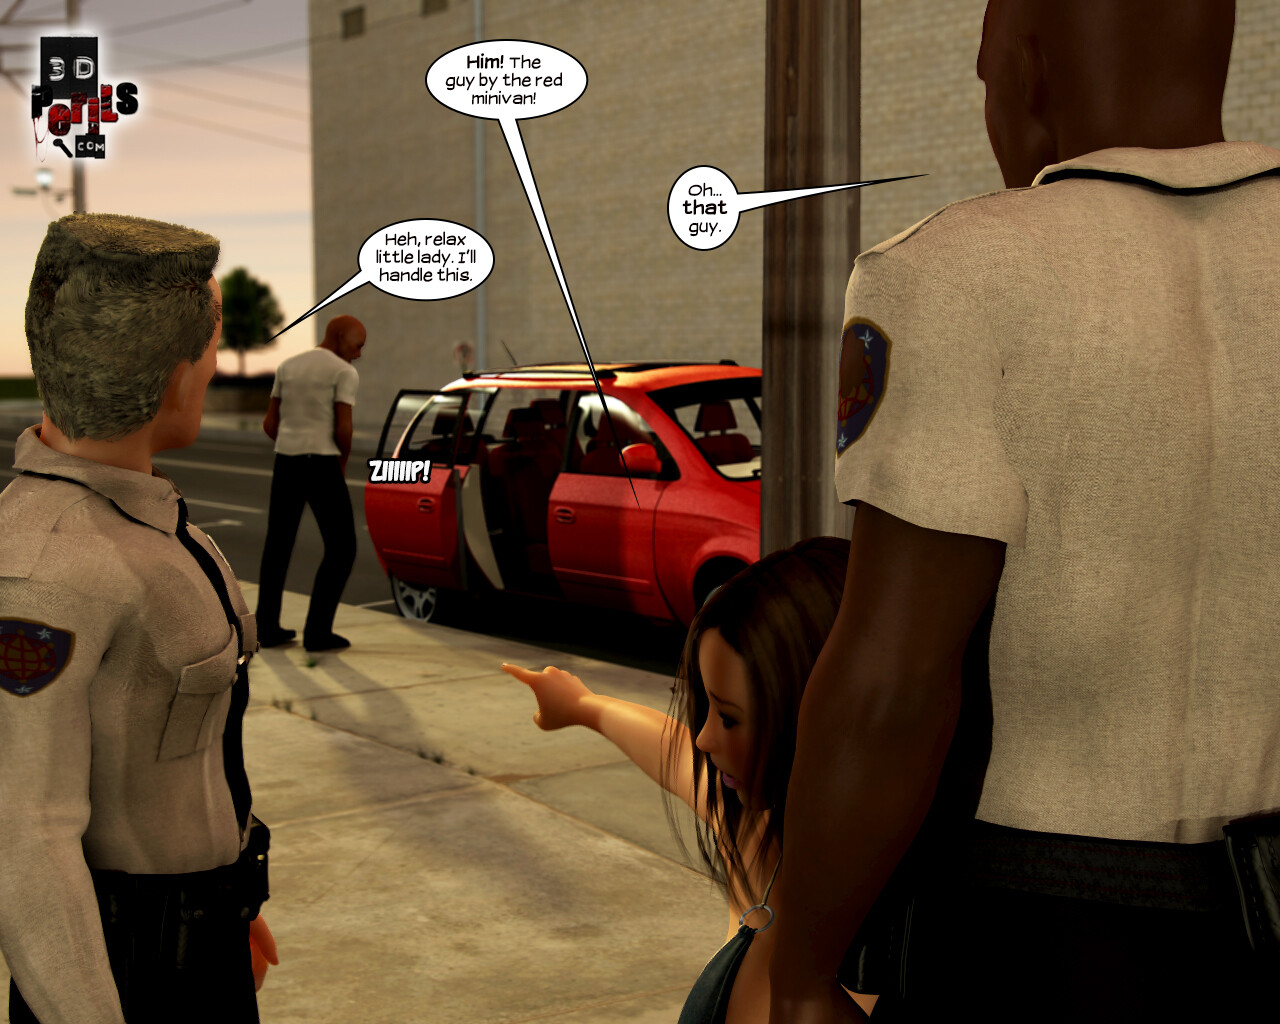 The Abduction - Chapter 2 Screenshot